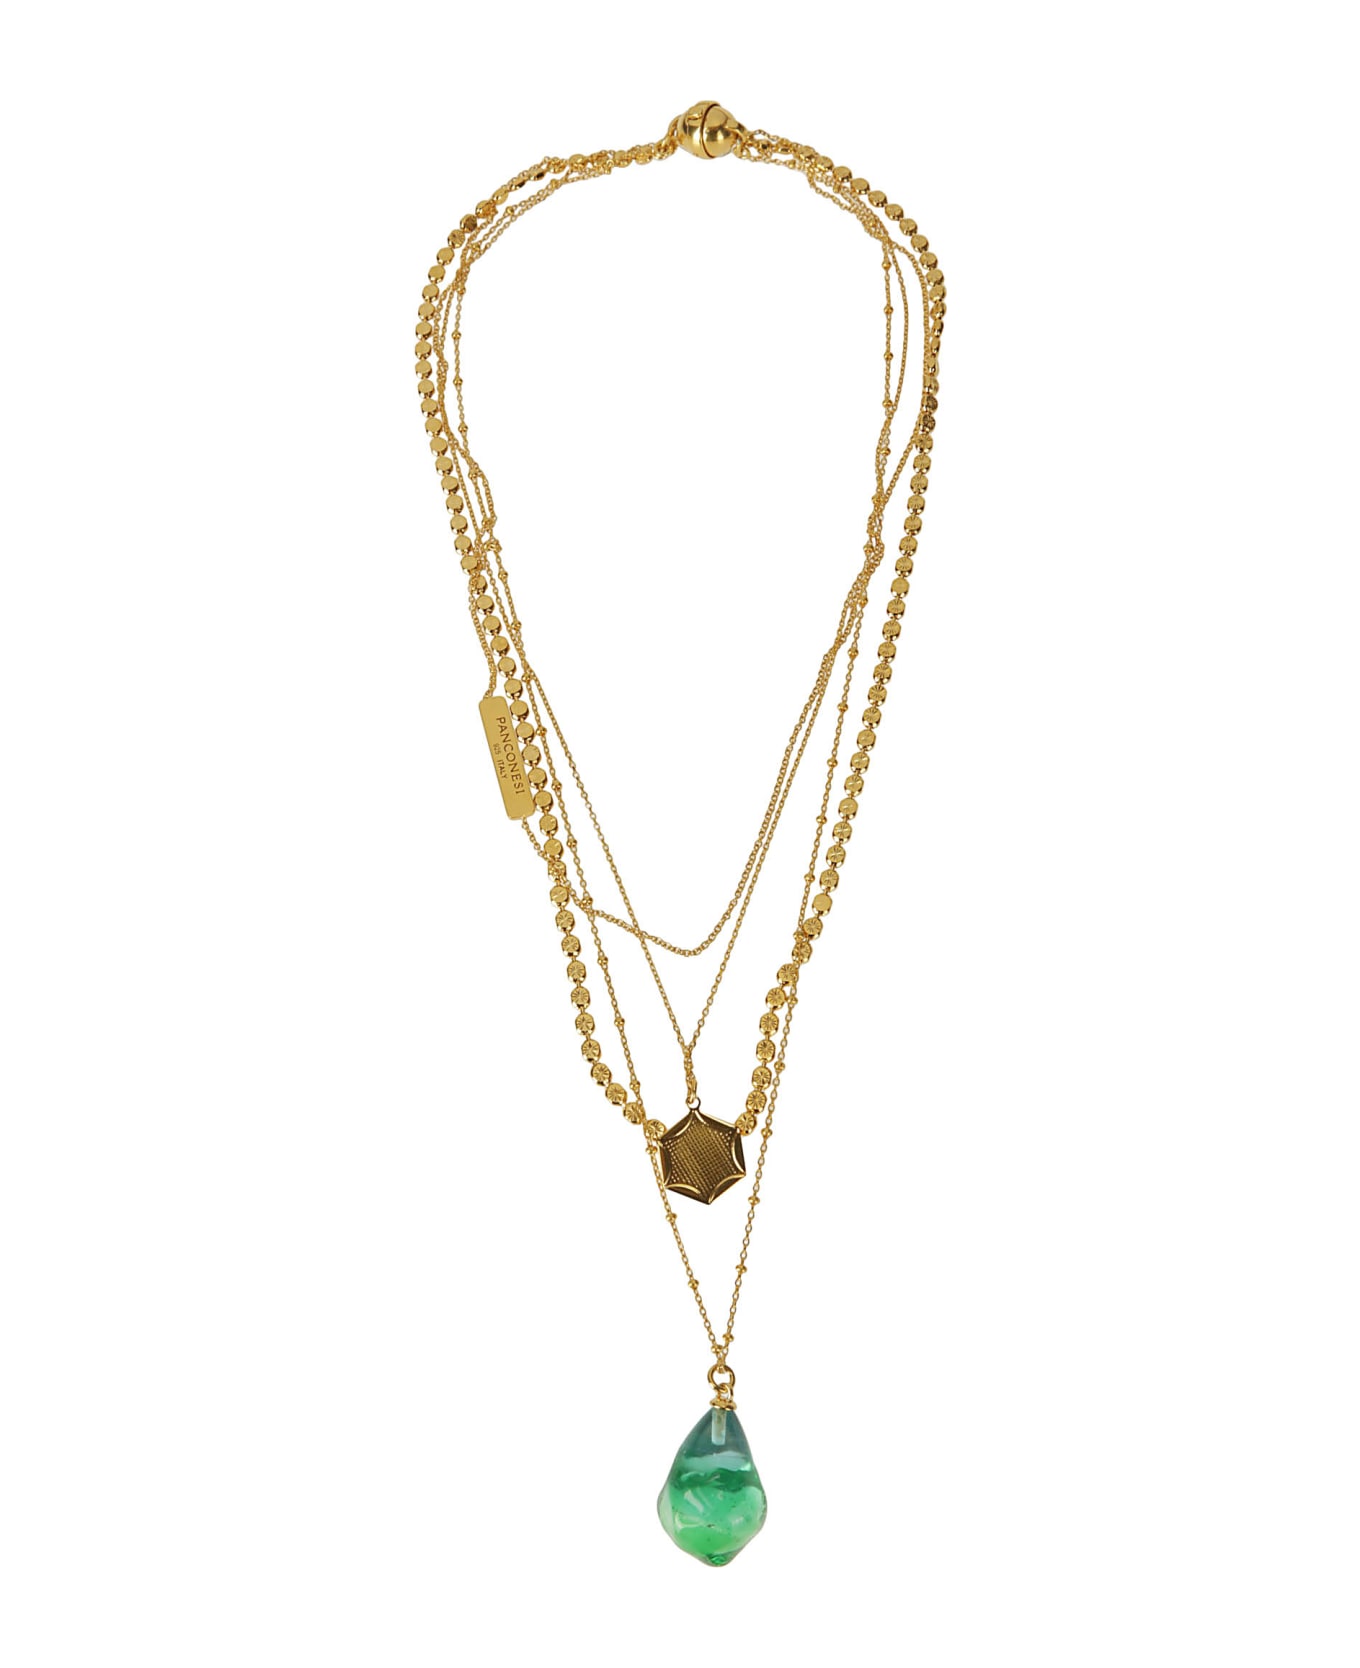 Panconesi Famiglia Necklace - GOLD ネックレス